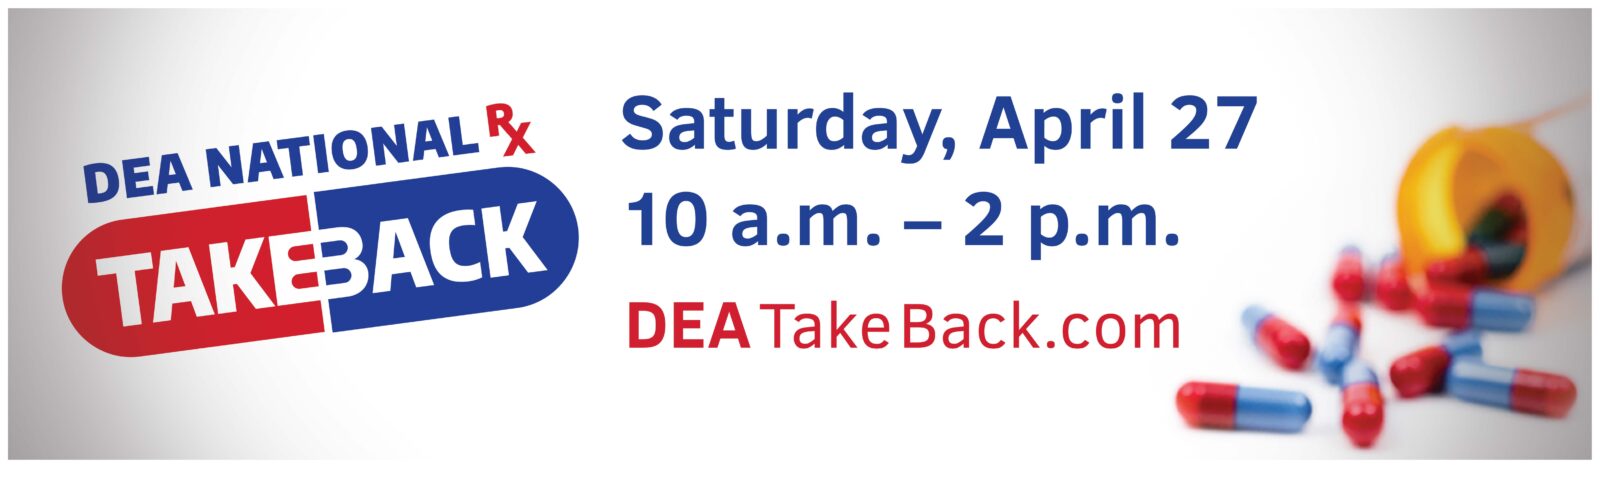 A billboard announcement about National Prescription Drug Takeback Day on Saturday April 27.